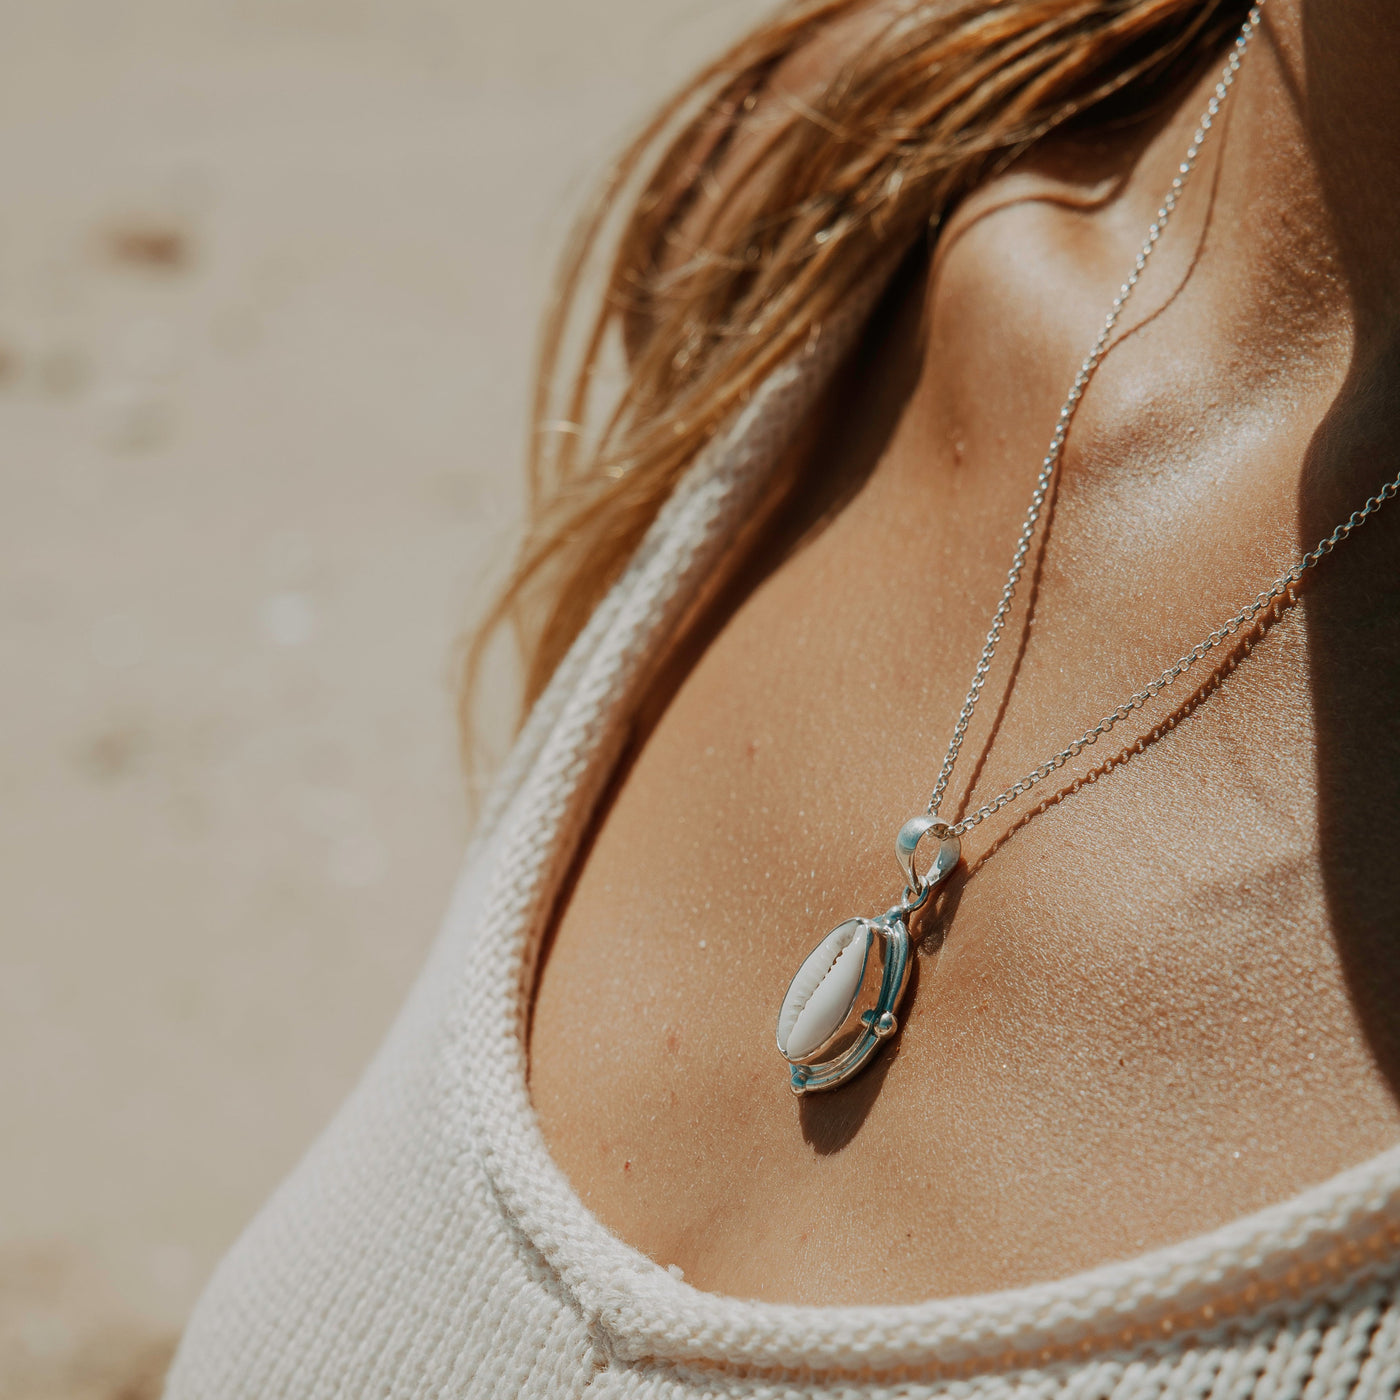 Girl of the Ocean Necklace